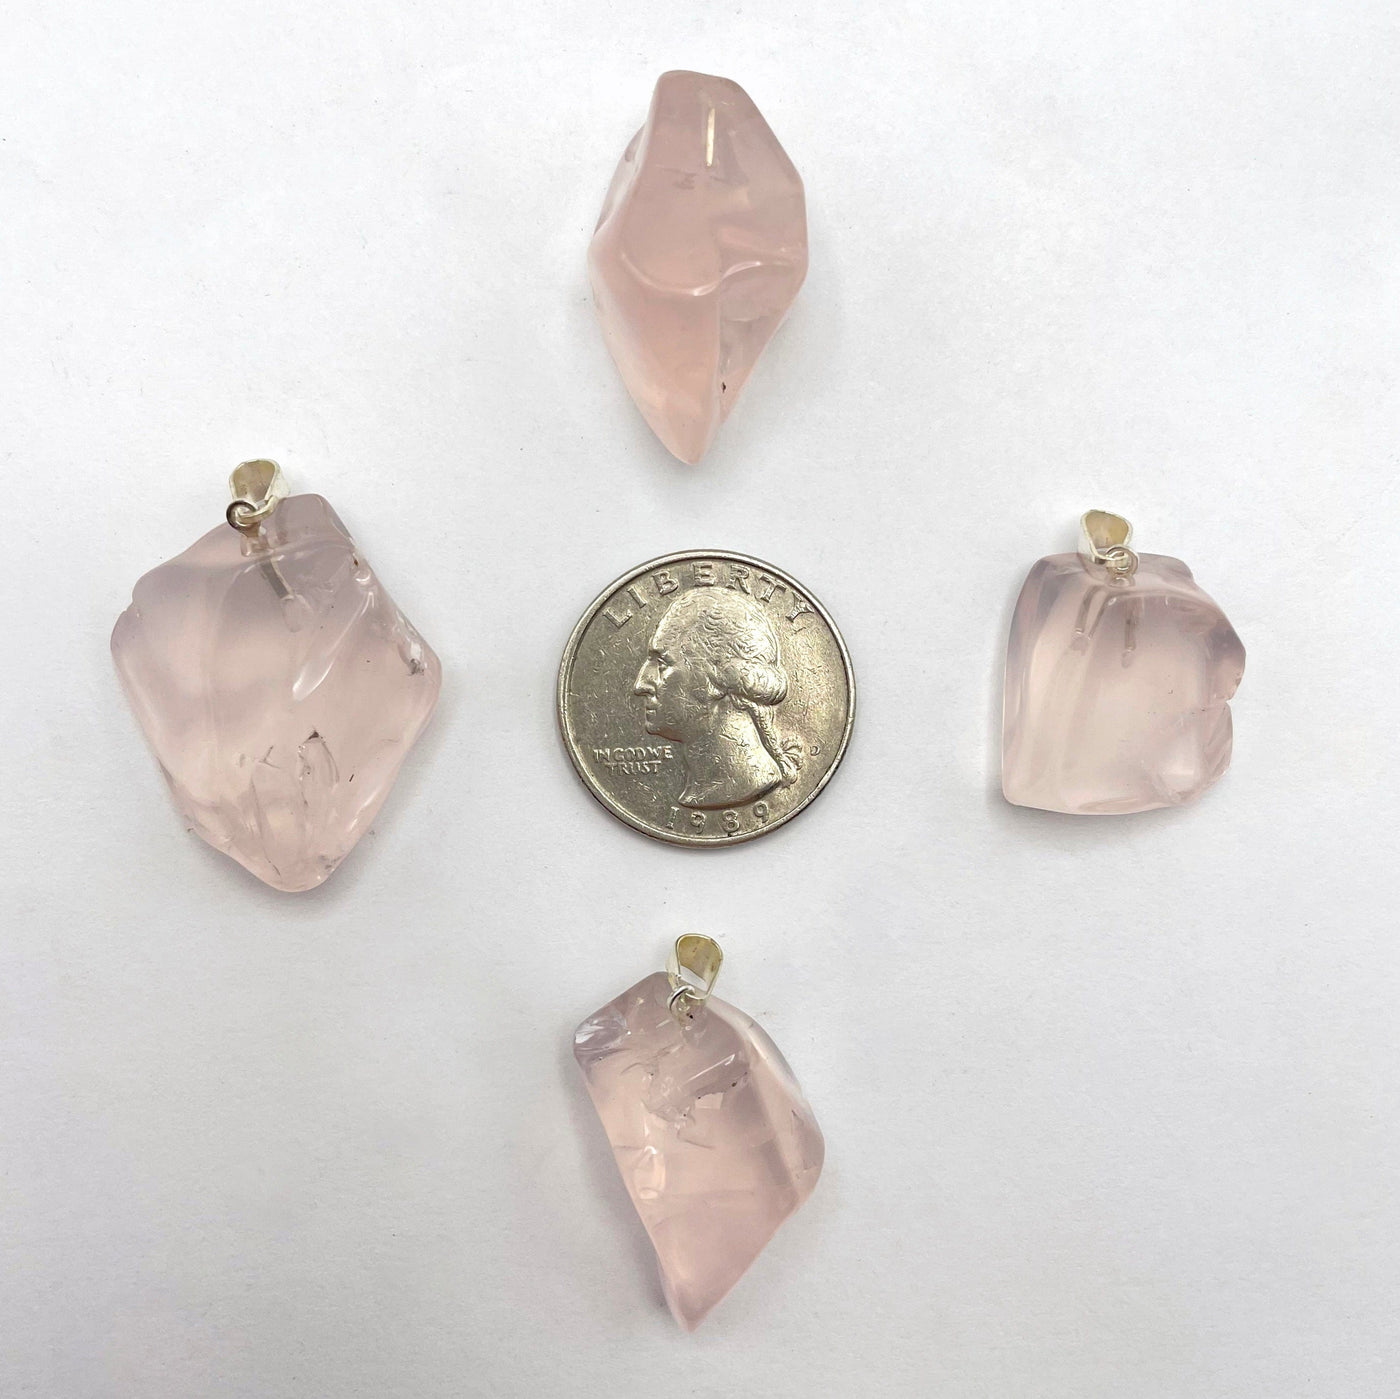 four tumbled rose quartz pendants on white background with quarter for size reference